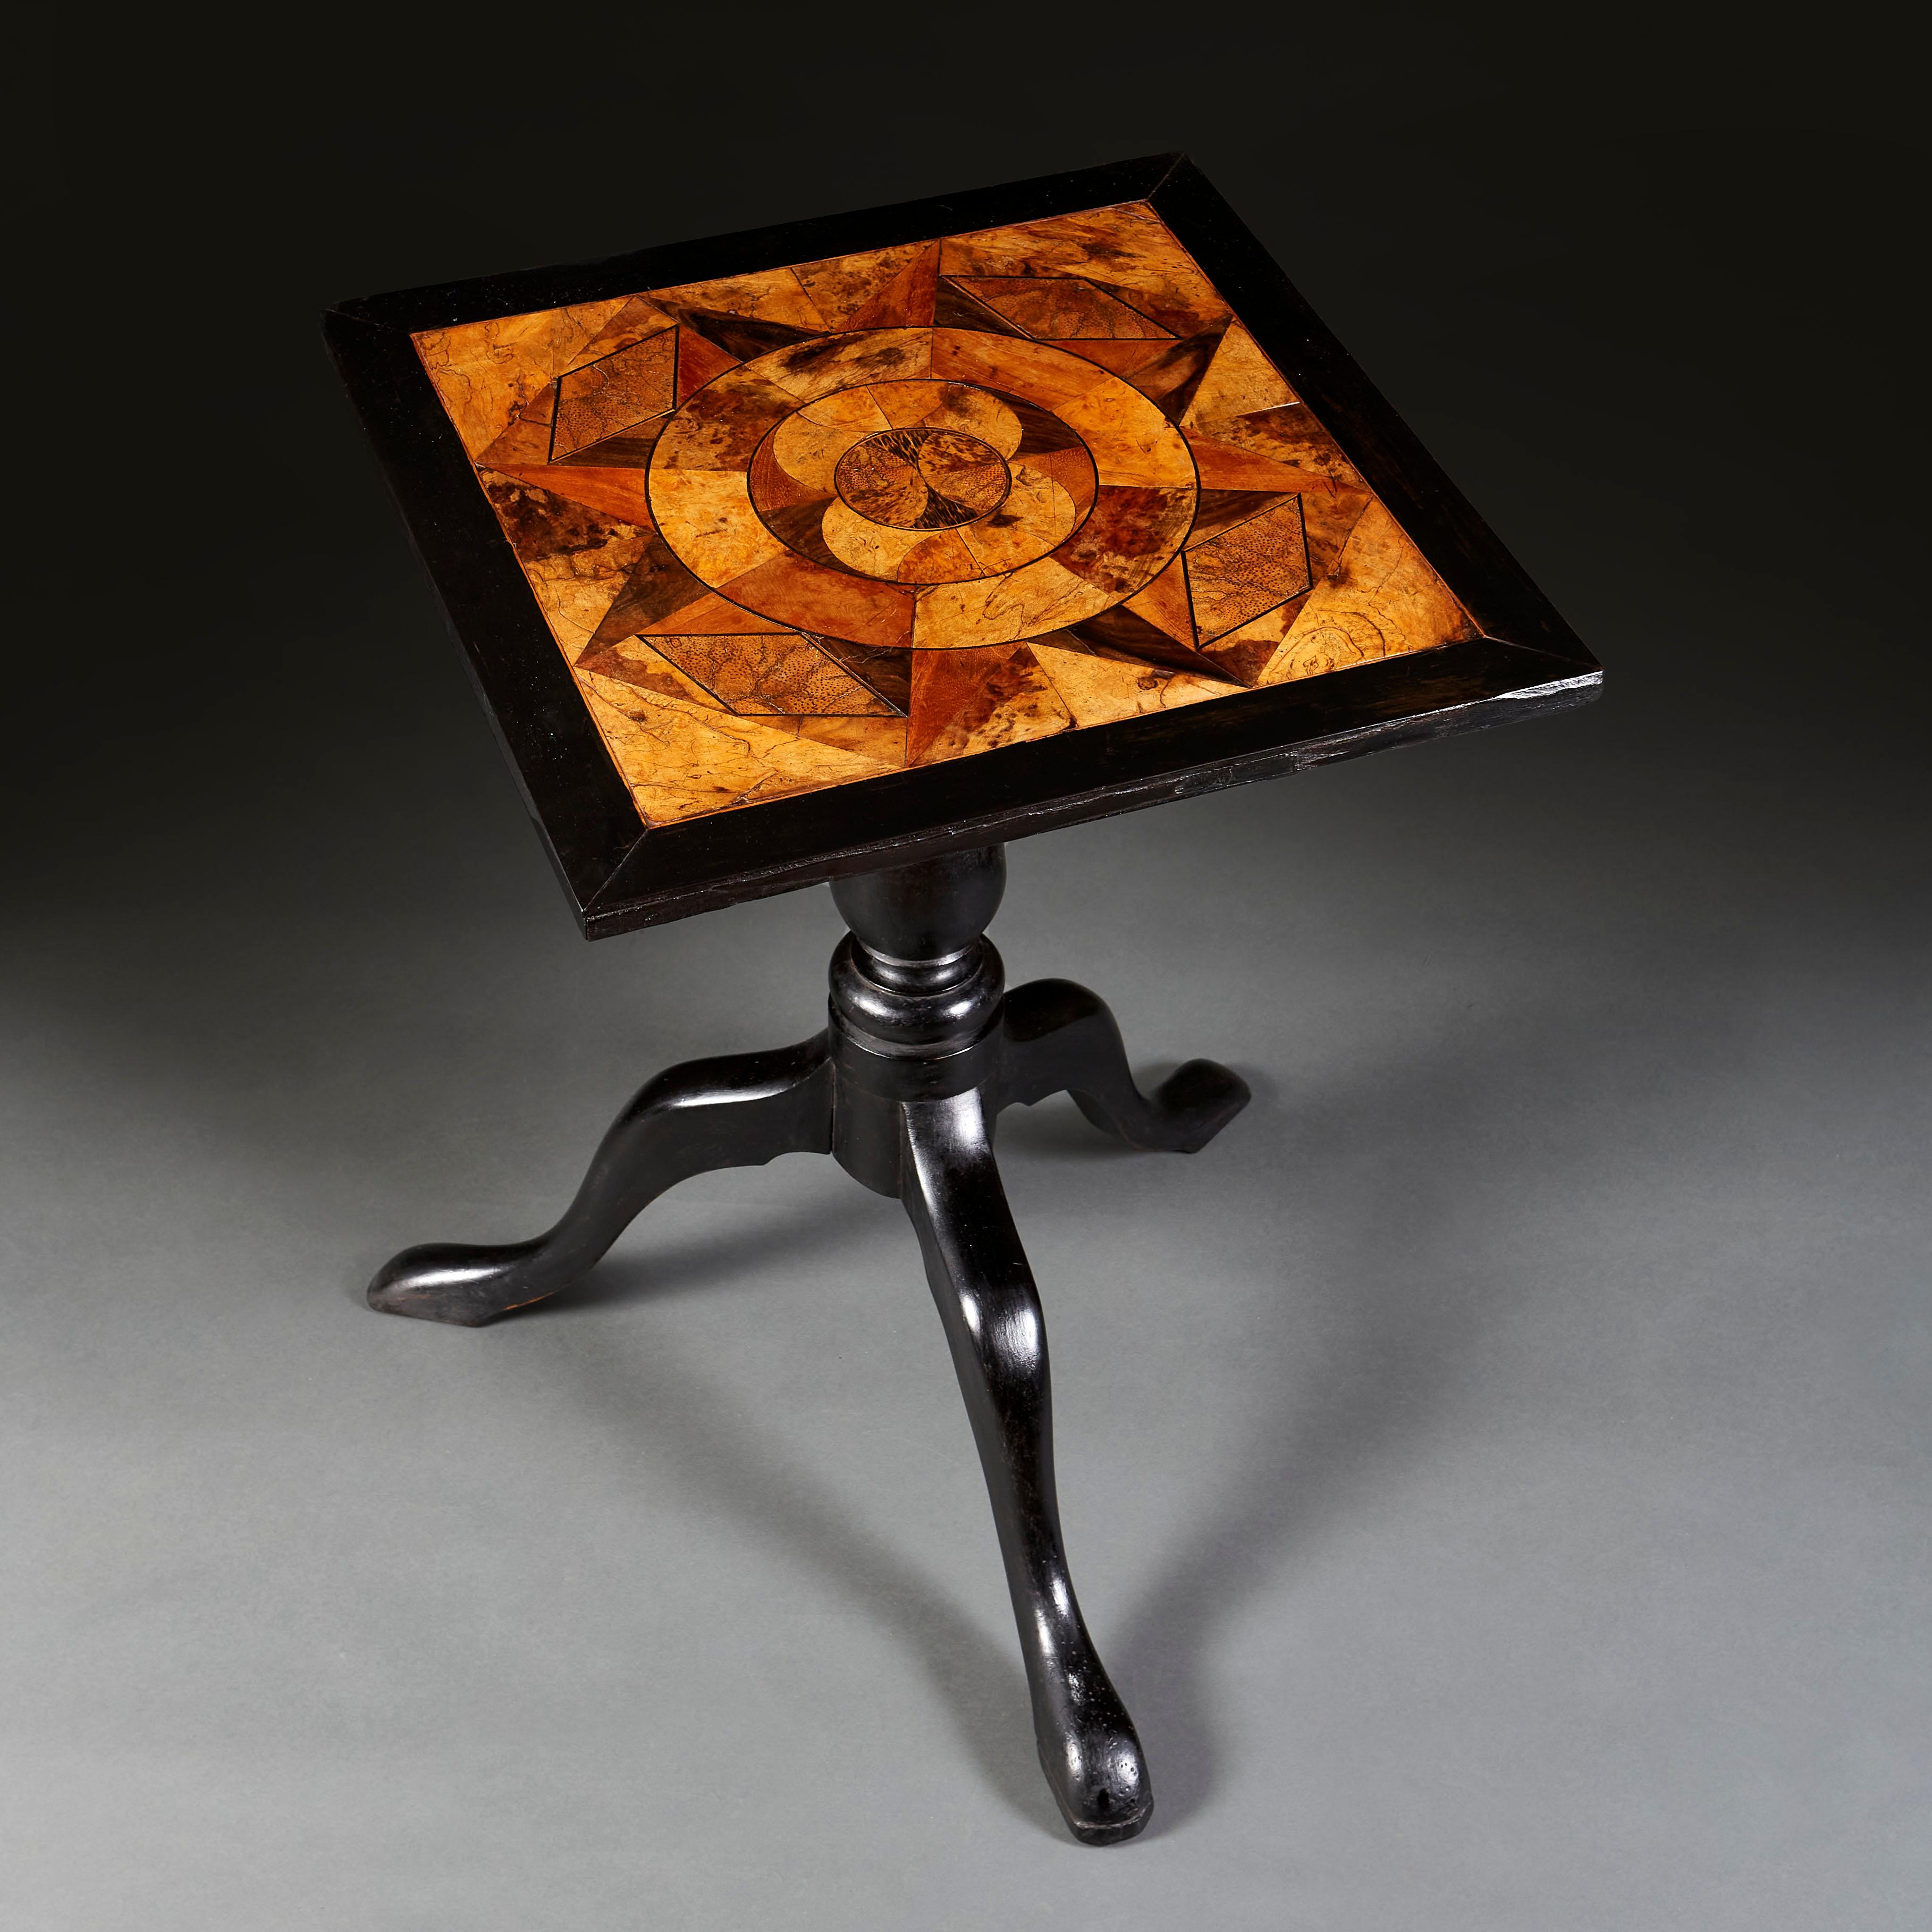 A mid nineteenth century ebonised occasional table with top incorporating rare and exotic specimen woods, all supported on a tripod base.